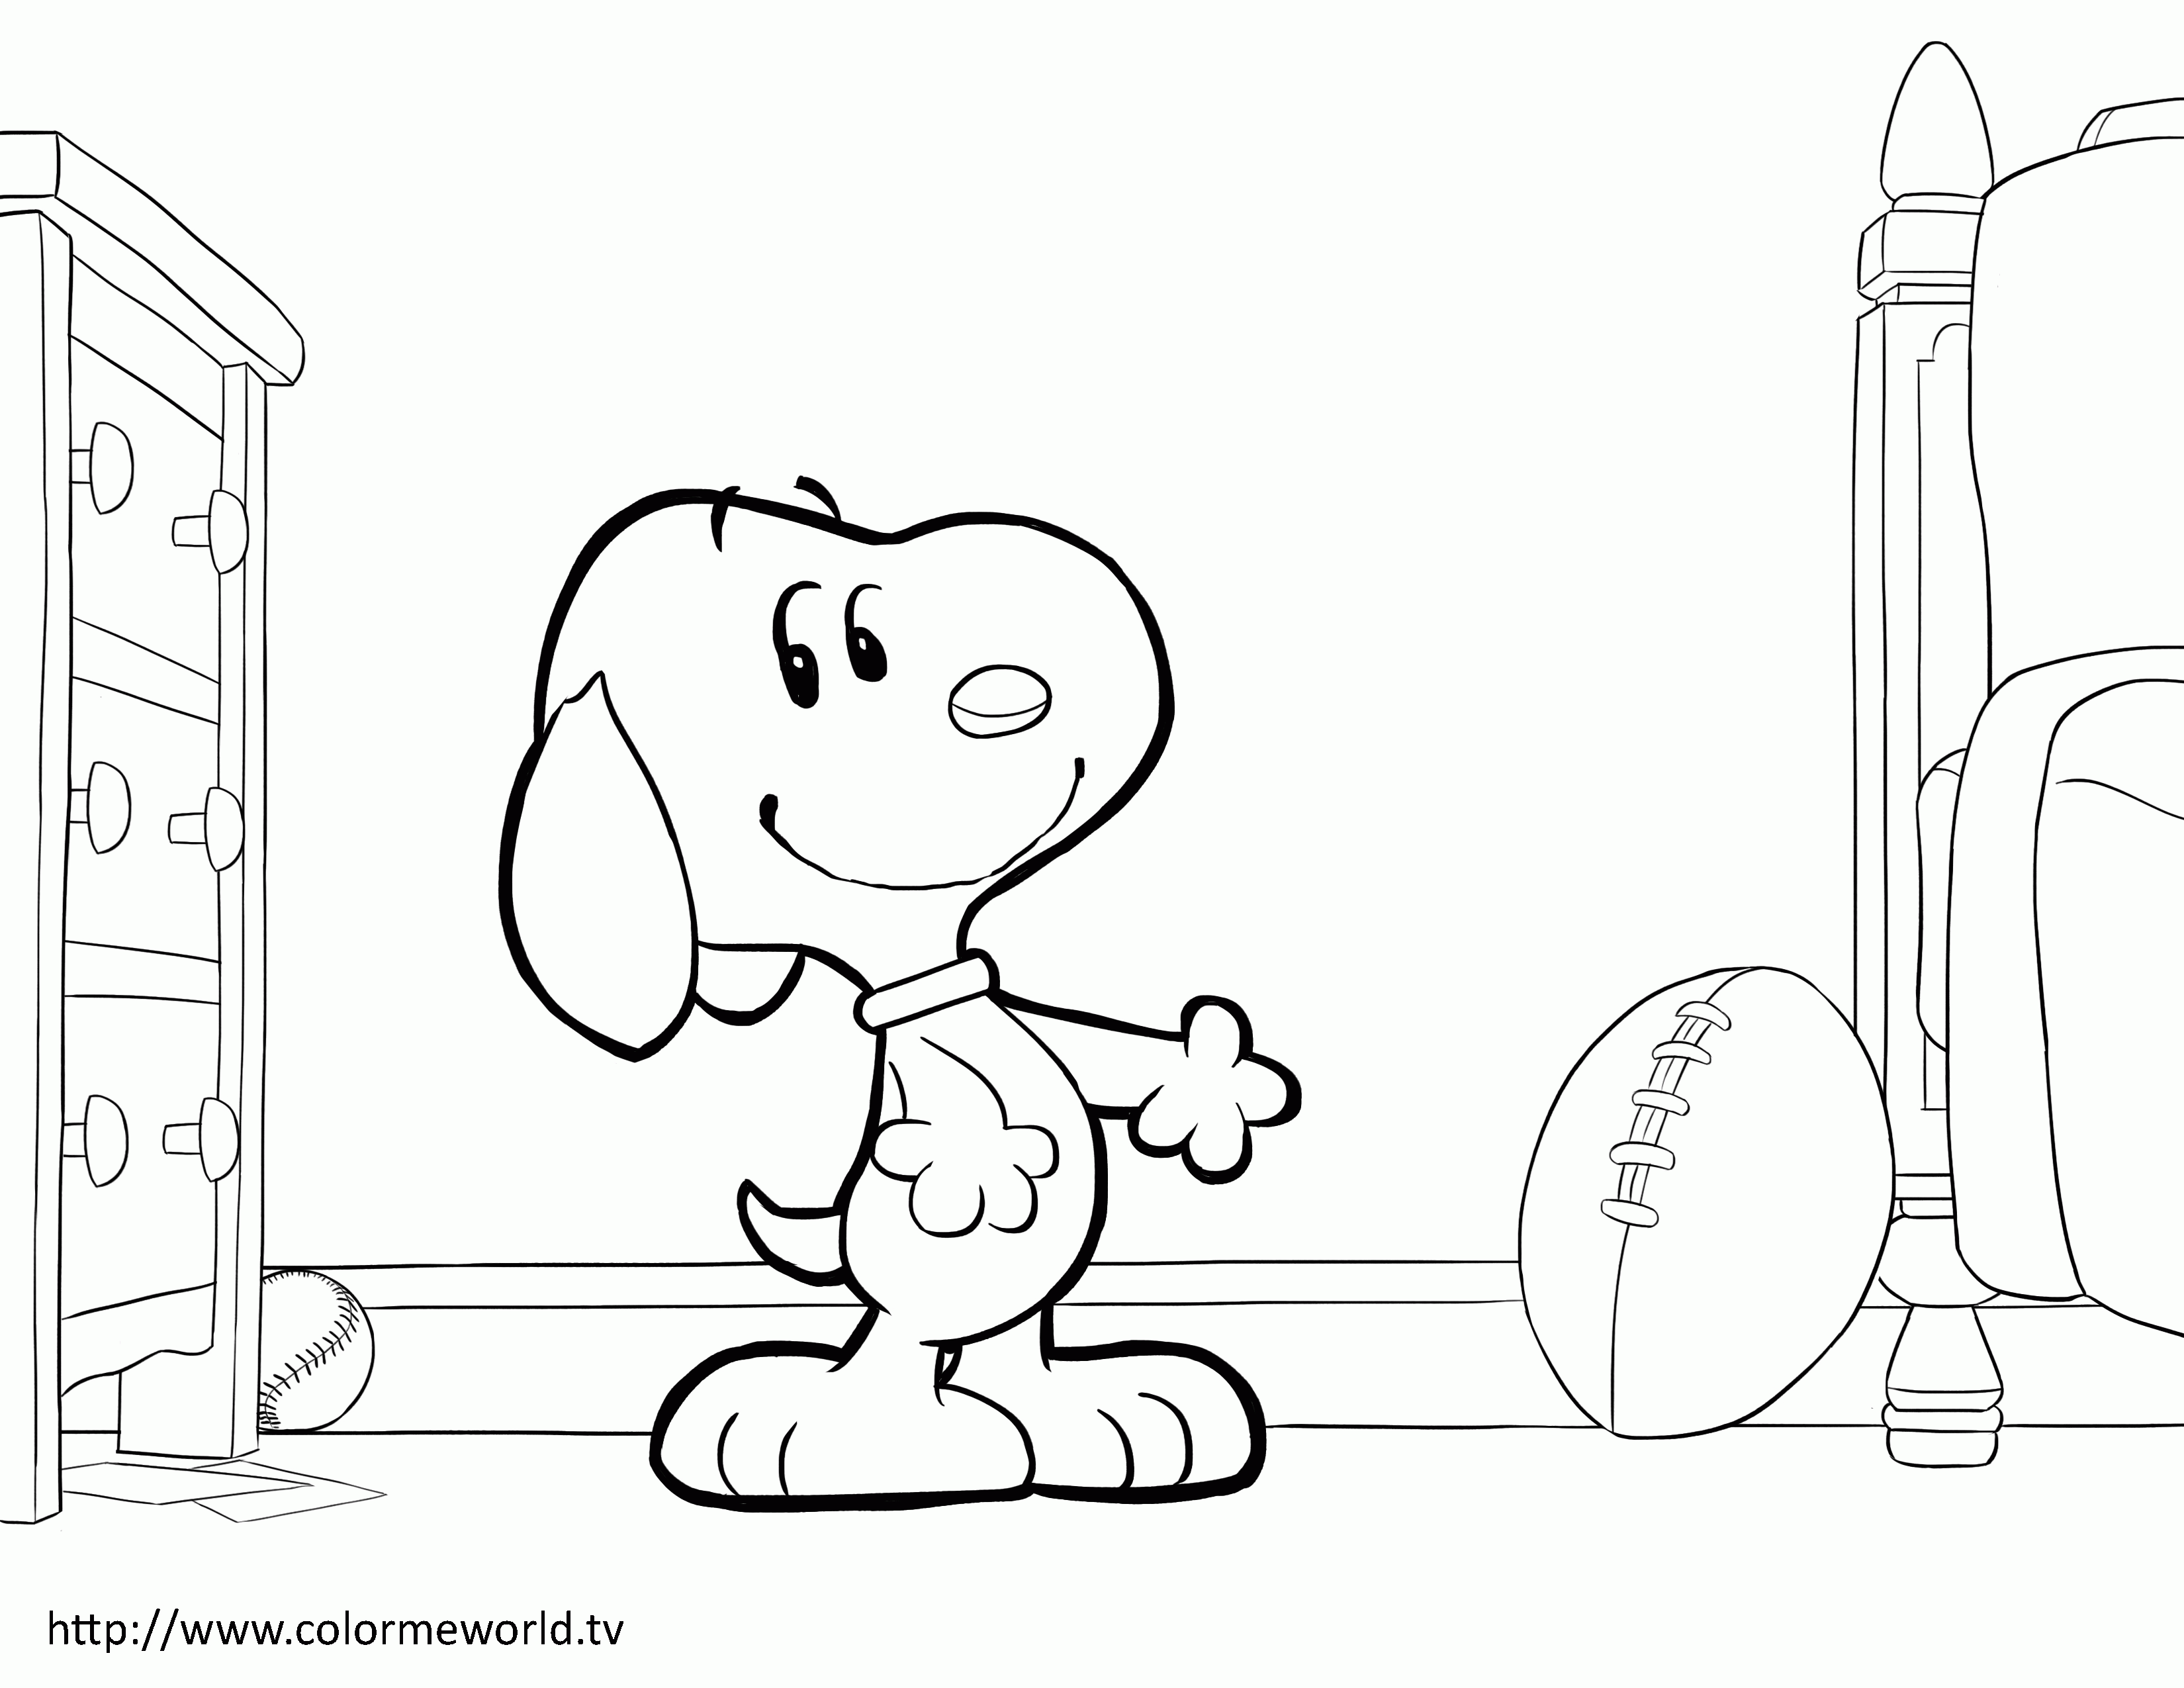 Woodstock Coloring Pages - Coloring Home